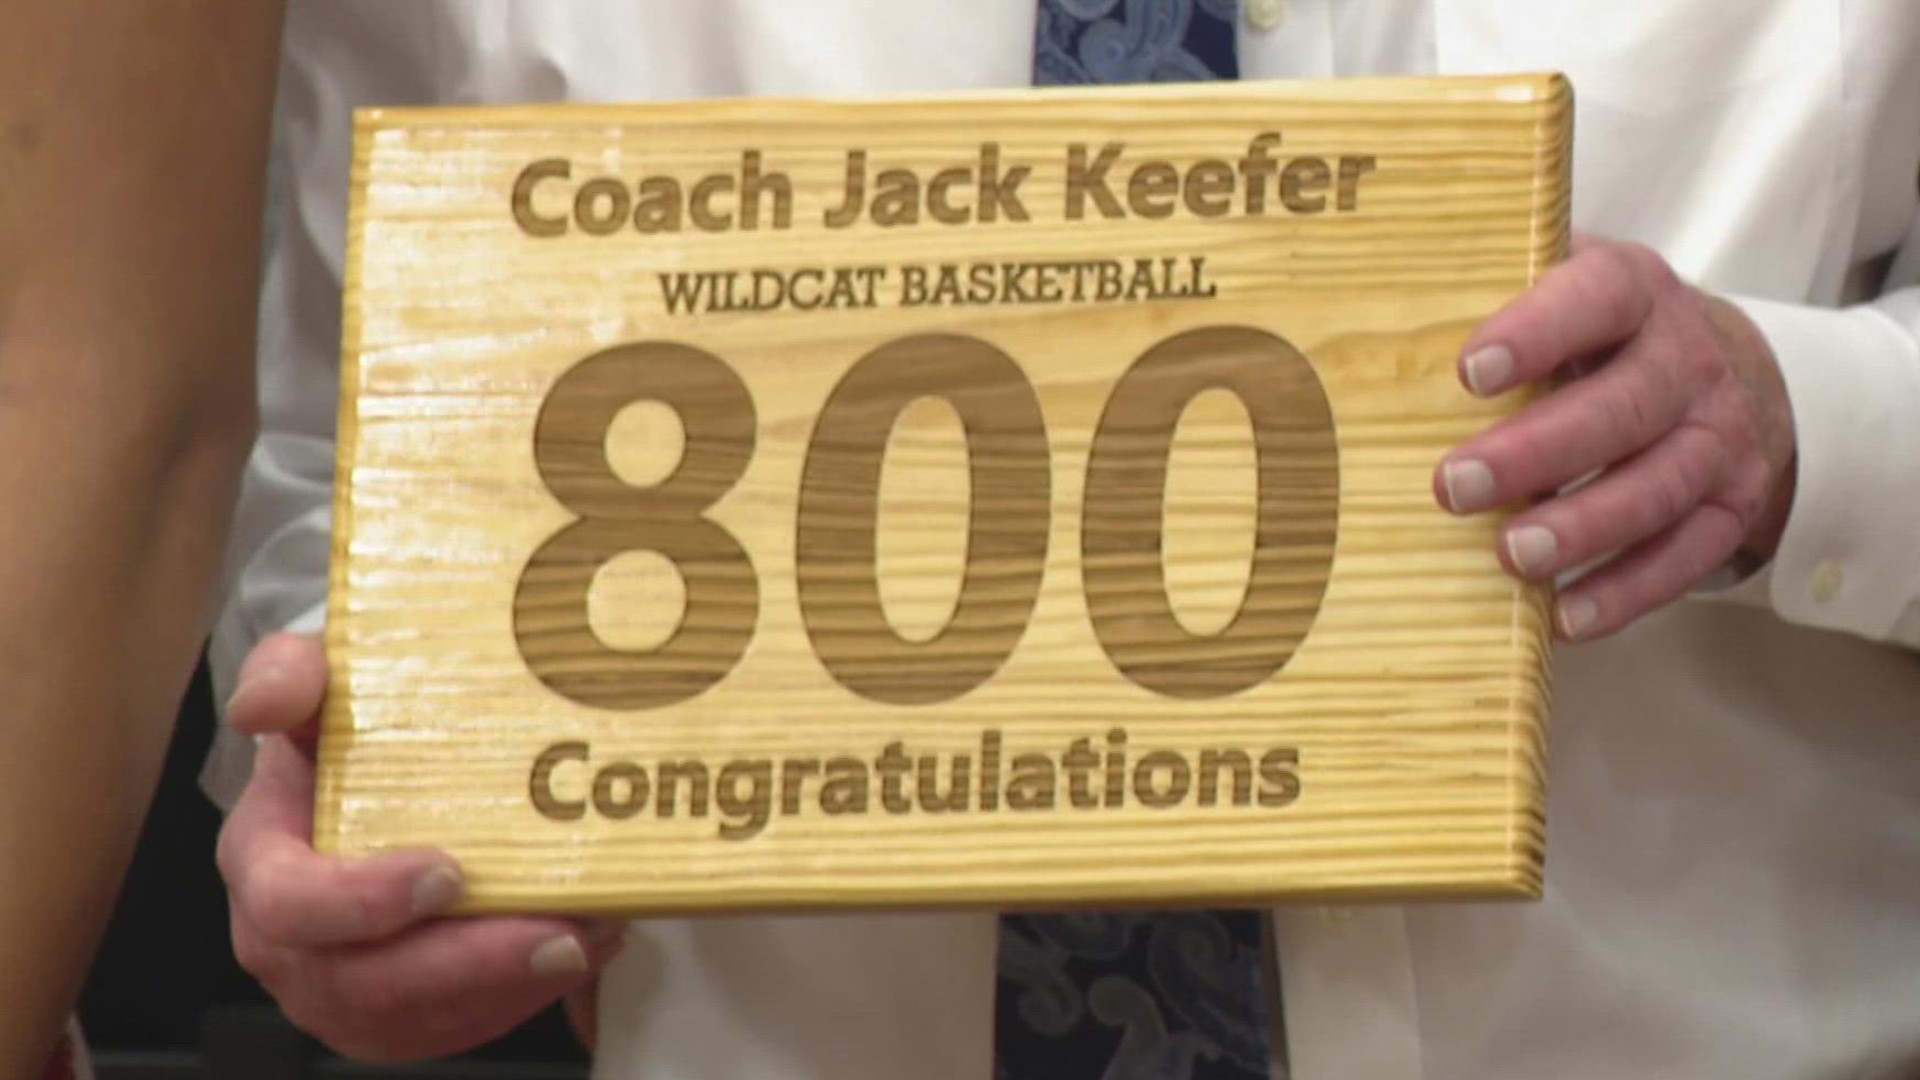 The win was coach Jack Keefer's 800th at LN.